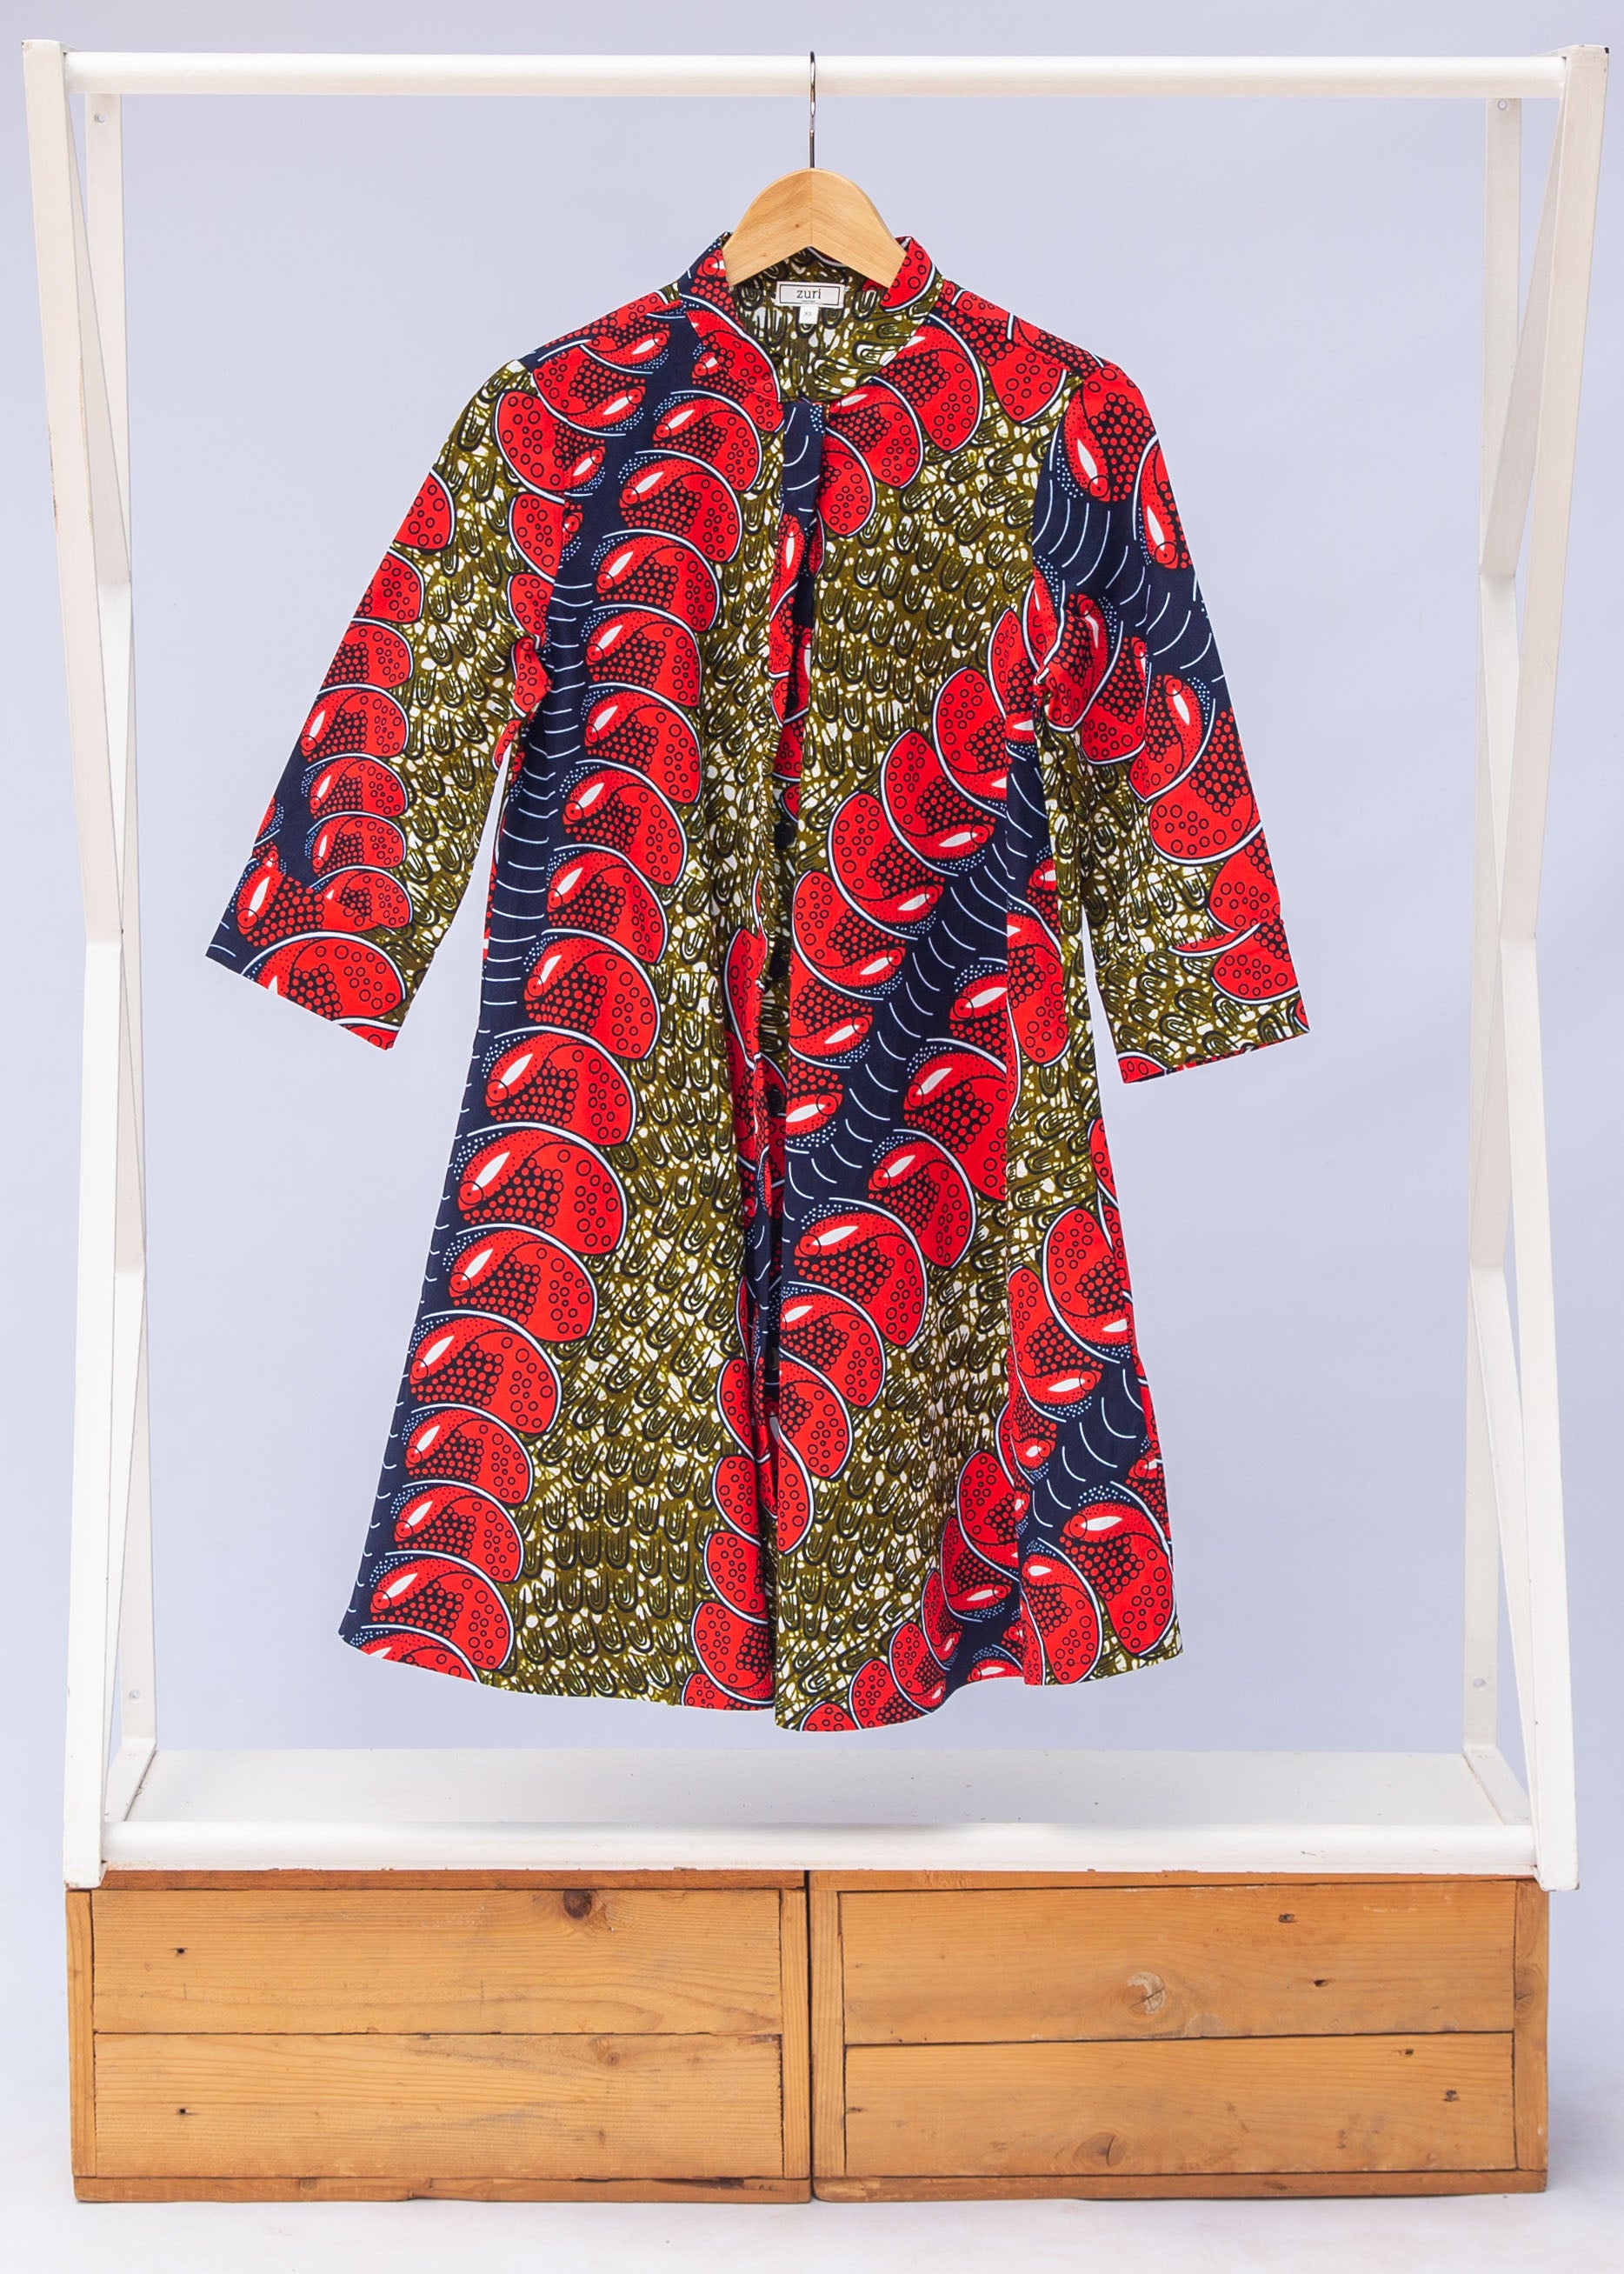 Display of green dress, with bold red and navy bauble print.